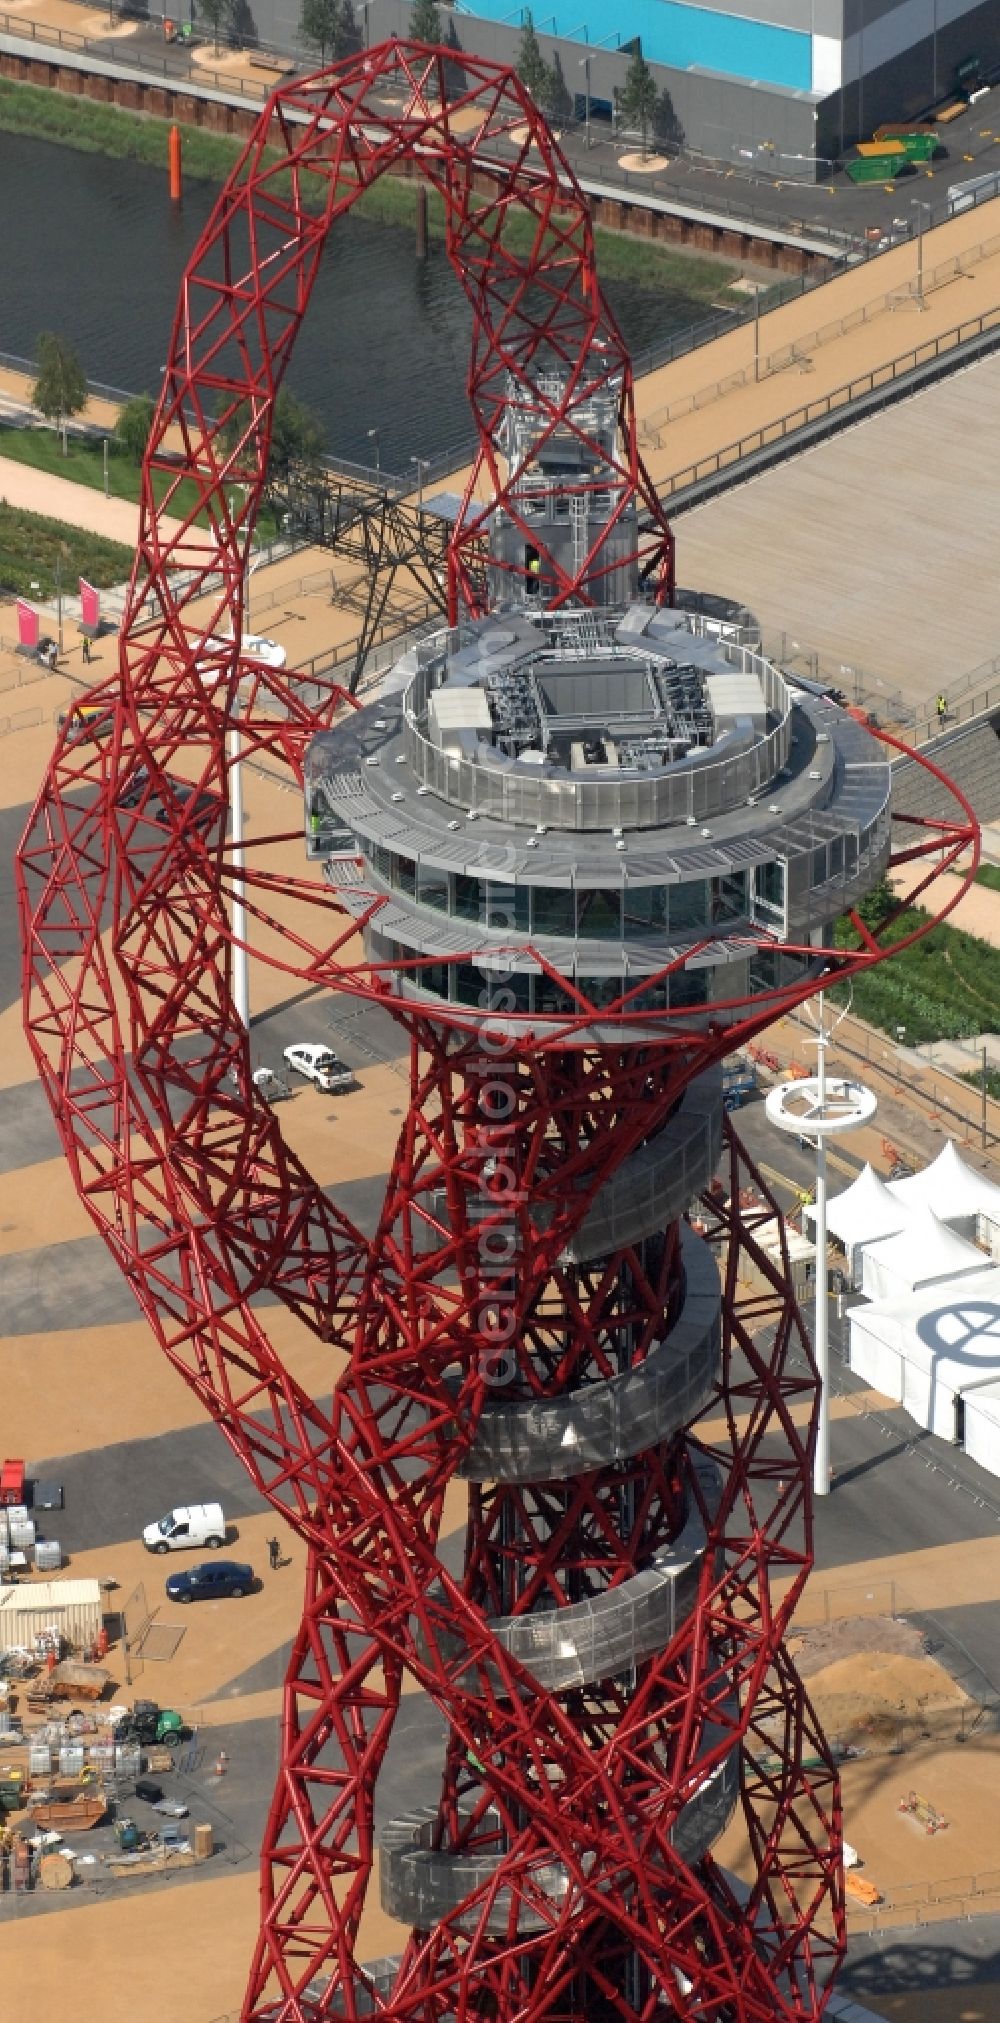 London from above - The ArcelorMittal Orbit is a 115-metre-high ( 377 ft ) observation tower in the Olympic Park in Stratford, London and is intended to be a permanent, lasting legacy of the Olympic and Paralympic Games 2012 in Great Britain